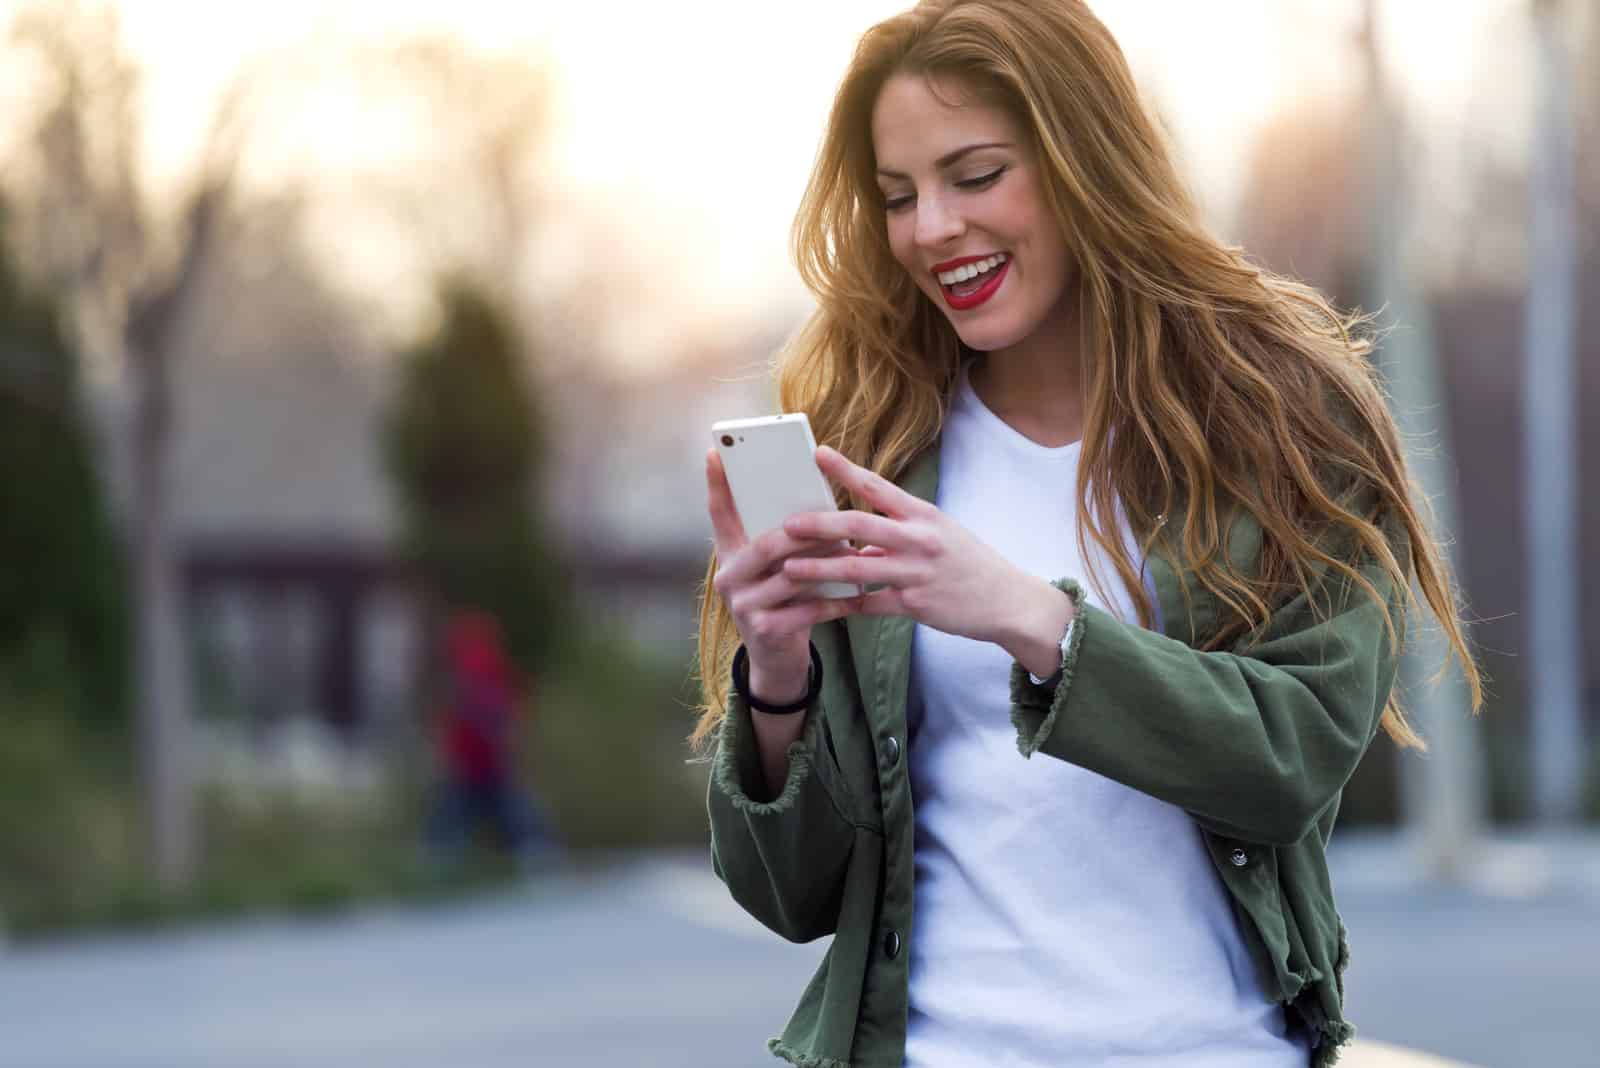 smiling woman with long brown hair button on the phone